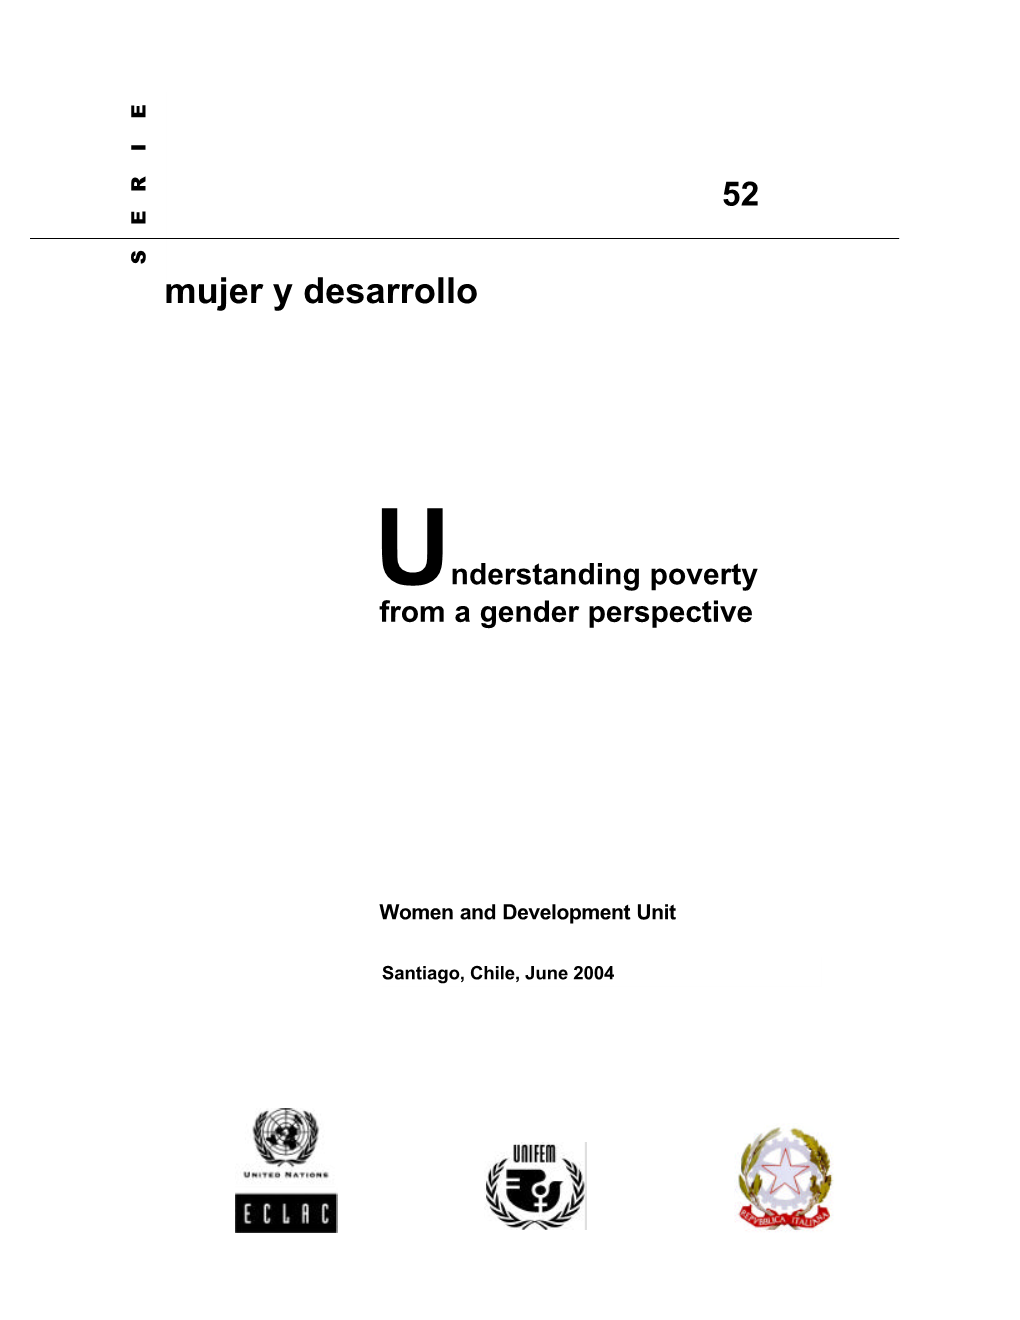 Understanding Poverty from a Gender Perspective